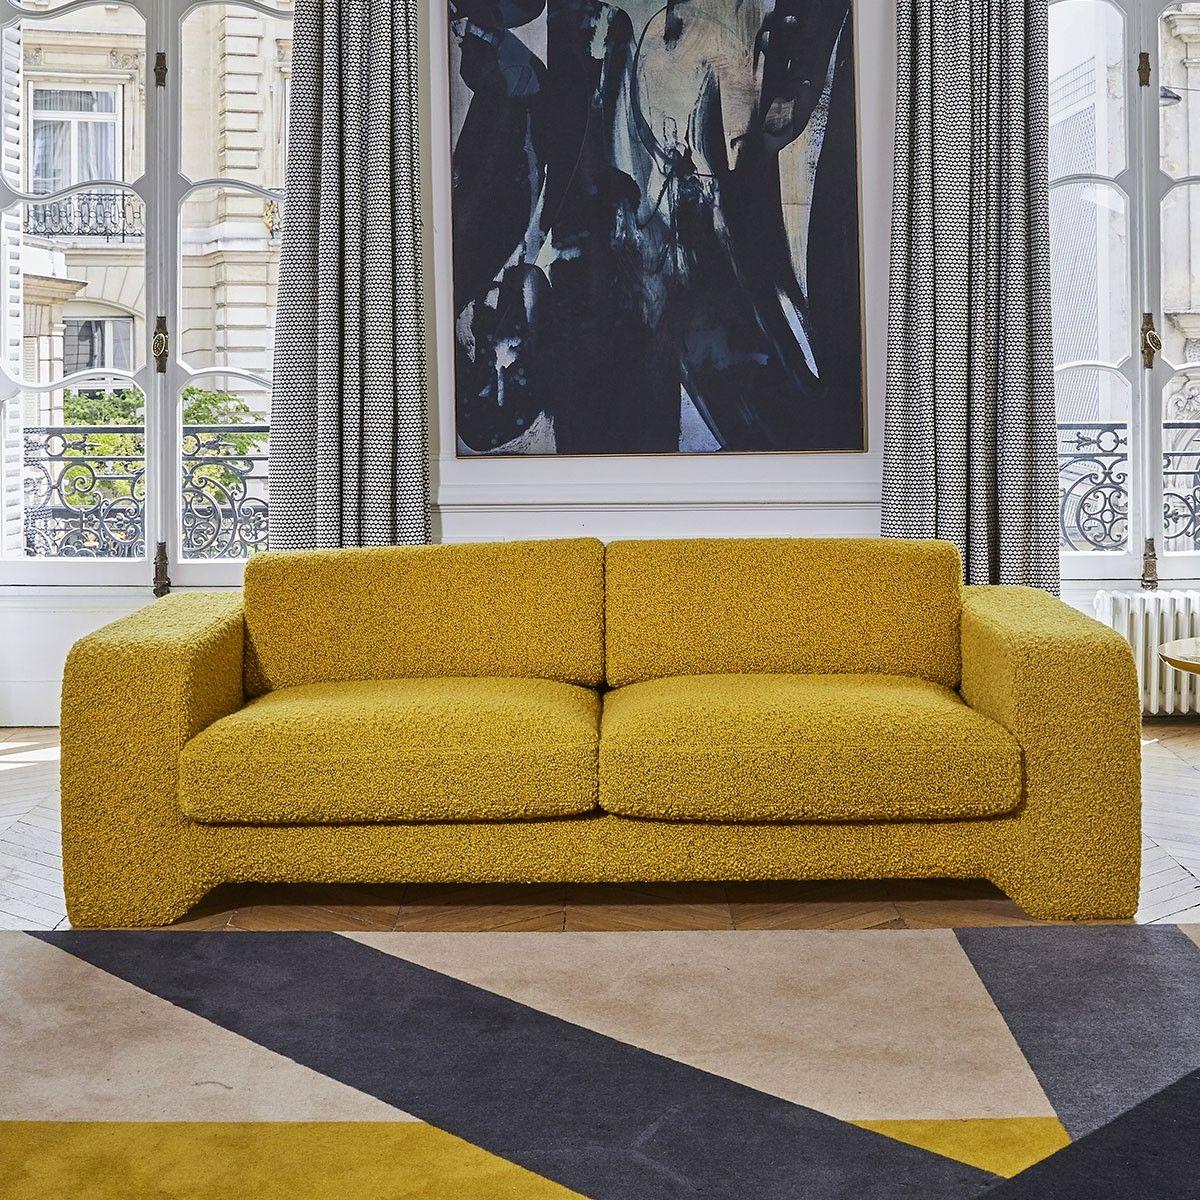 Popus Editions Giovanna 3 seater sofa in Beige Verone Velvet Upholstery

Giovanna is a sofa with a strong profile. A sober, plush line, with this famous detail that changes everything, so as not to forget its strength of character and this